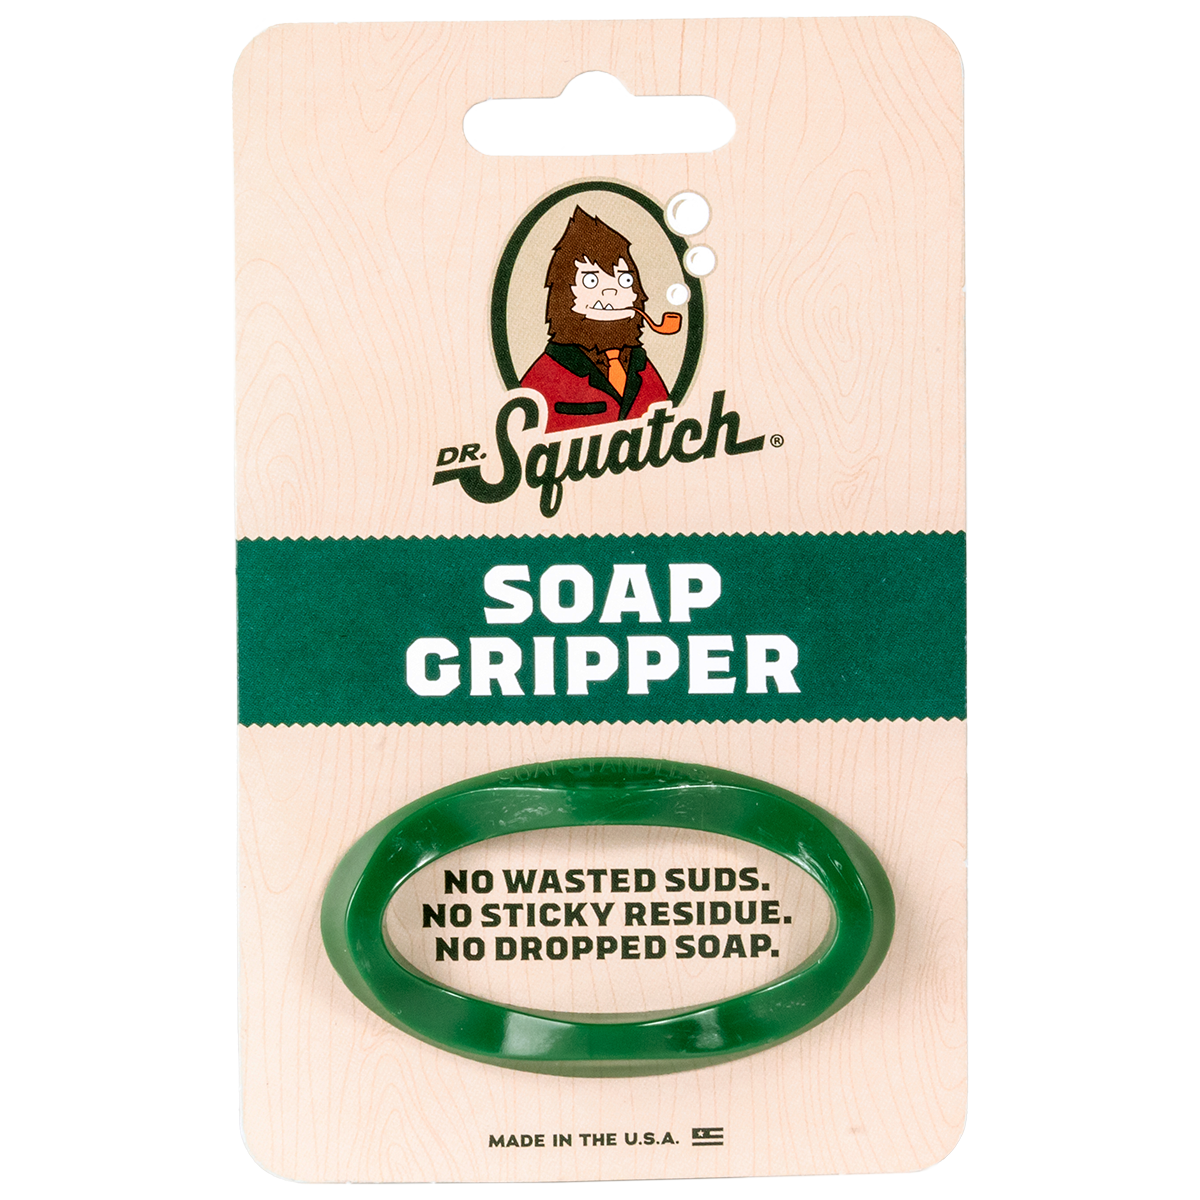 Dr. Squatch Men's Soap Variety Pack – Xtra American